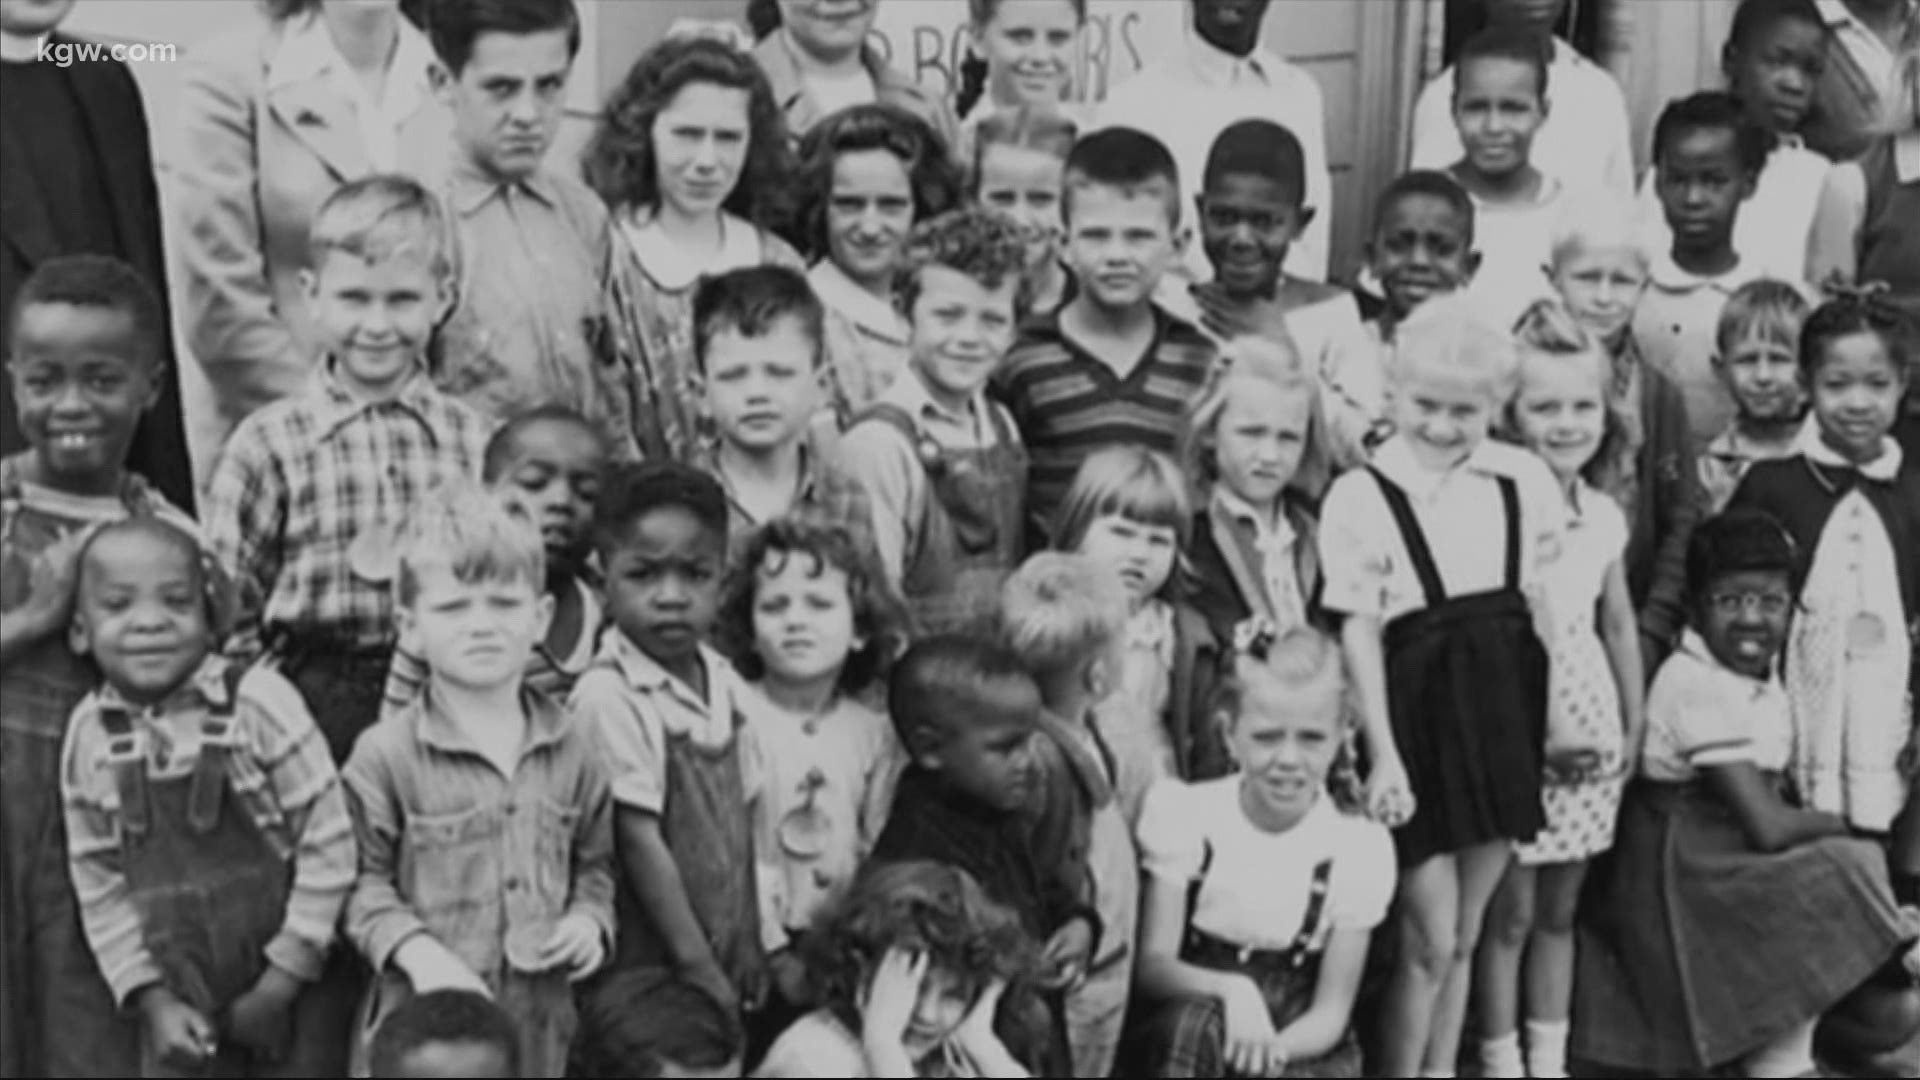 The history of Vanport, where Delta Park is now, touches on some raw topics we're still grappling with. For more, let's go into the KGW Vault.